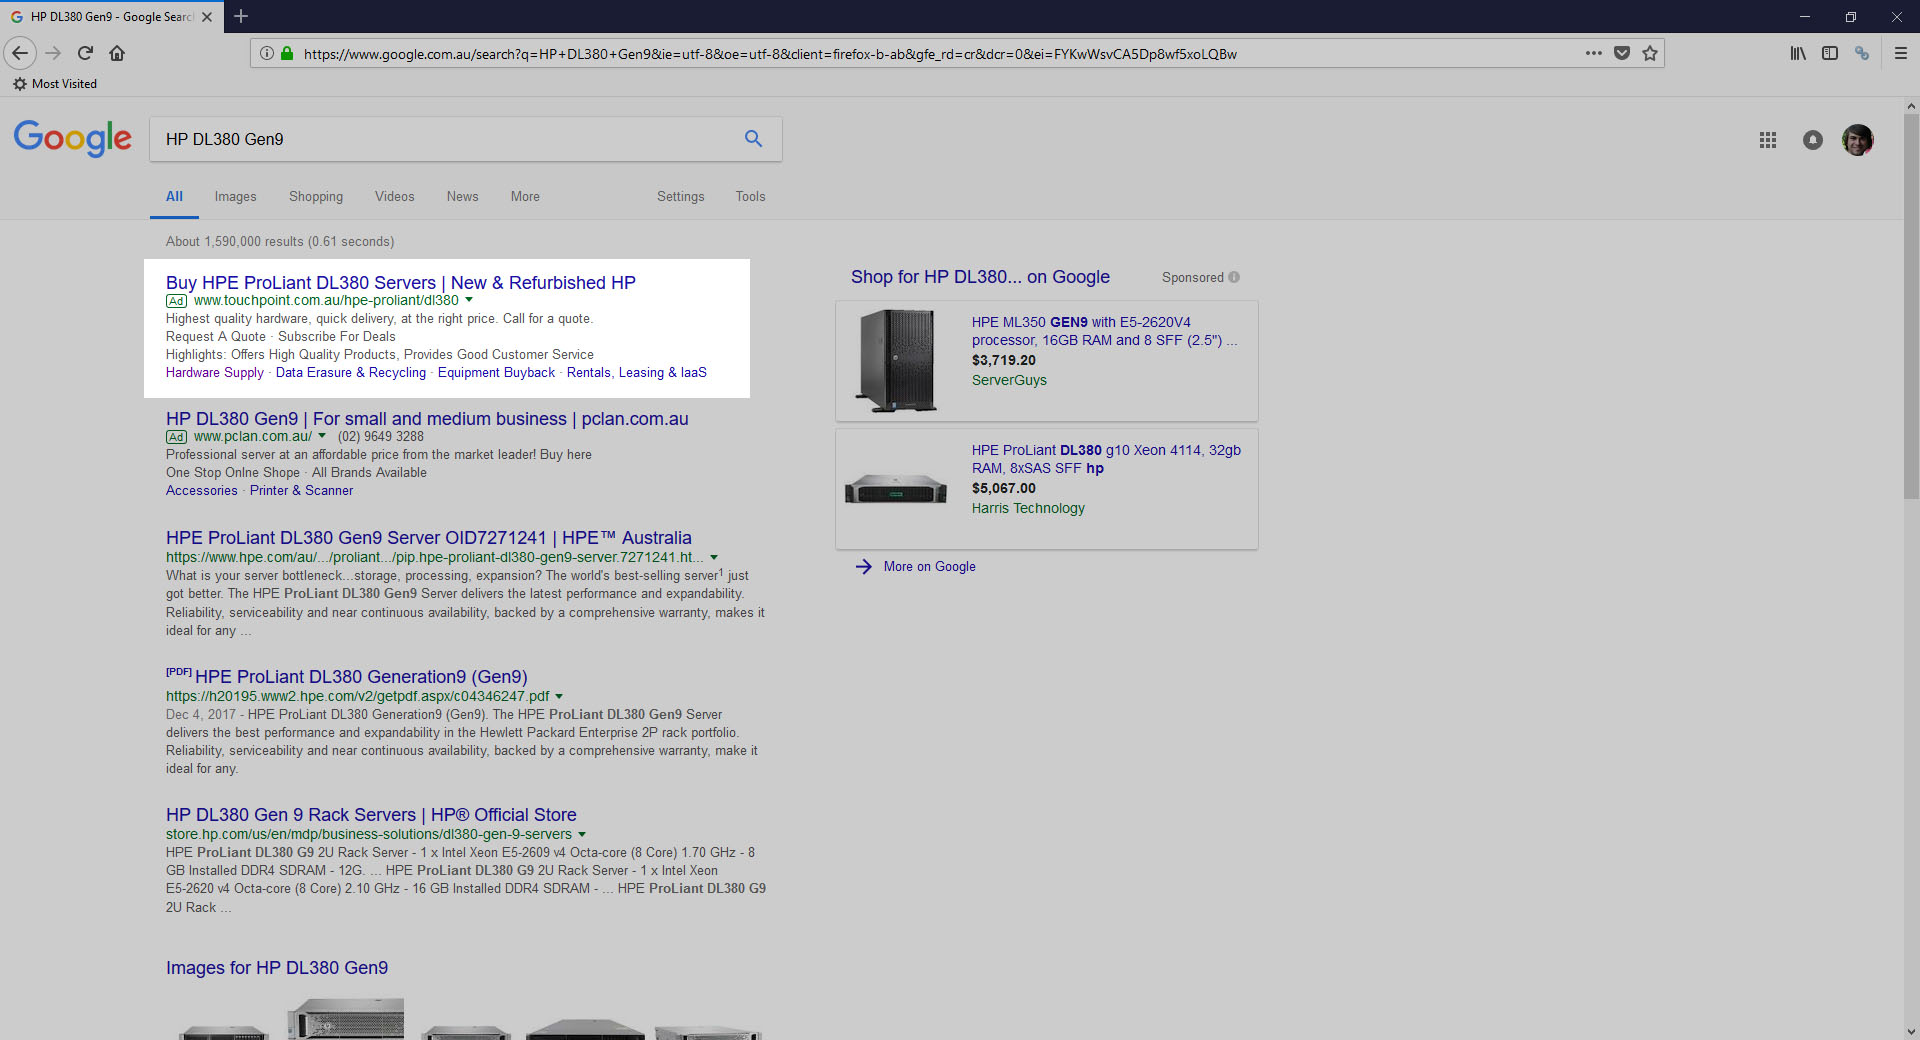 Touchpoint Adwords Search Ad